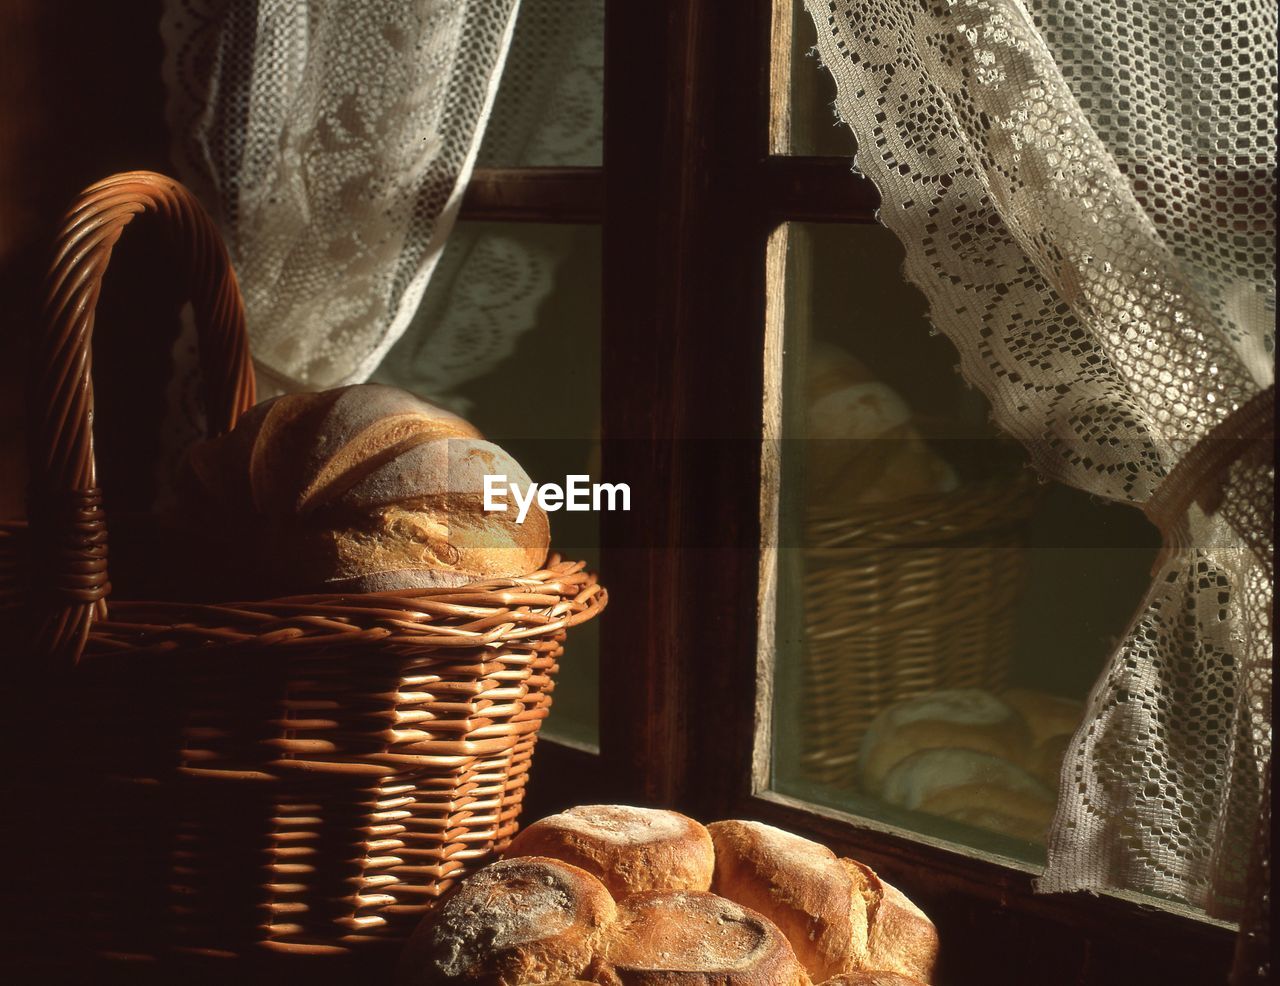 Brown breads in basket by closed window